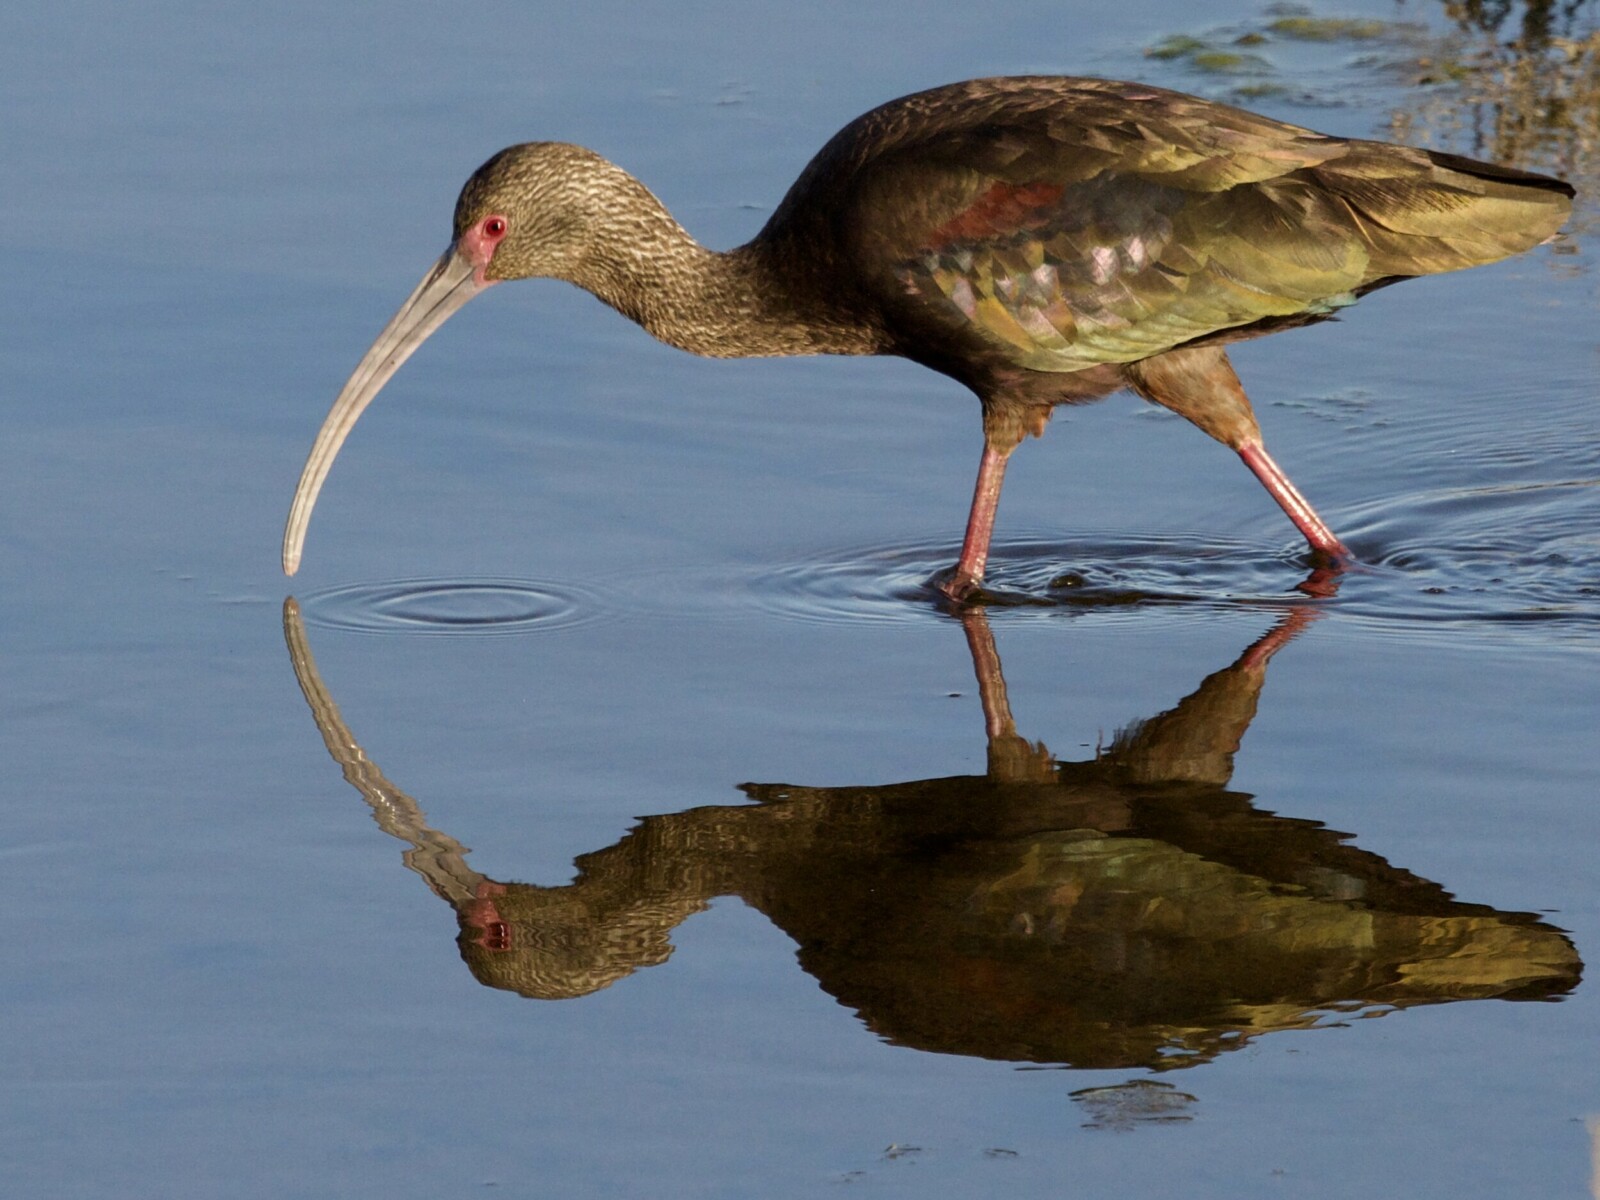 White-Faced Ibis Wading at Bolsa Chica Wetlands